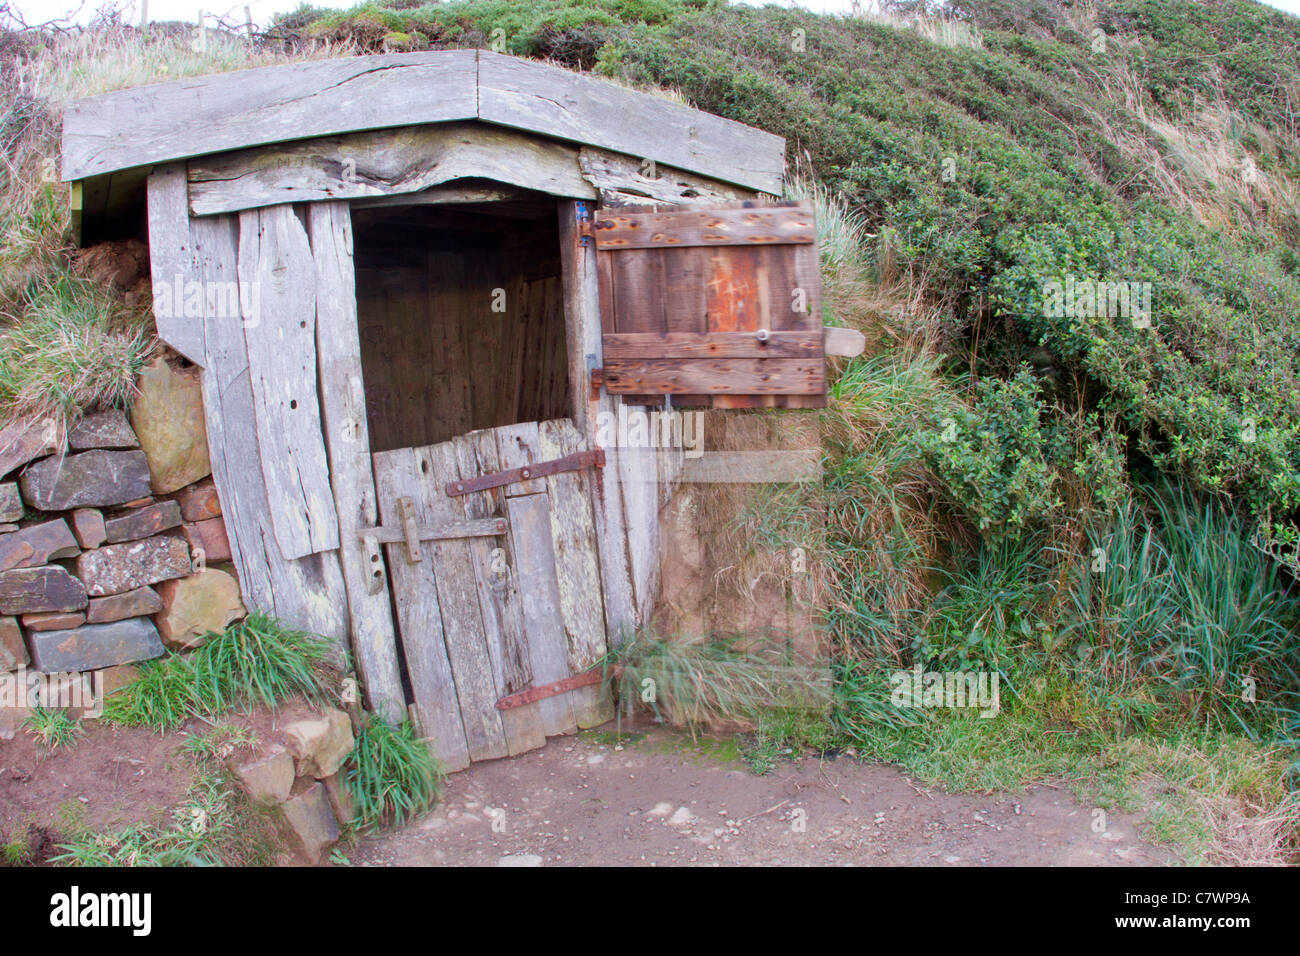 Hawker's Hut ; Morwenstow, Cornwall Banque D'Images